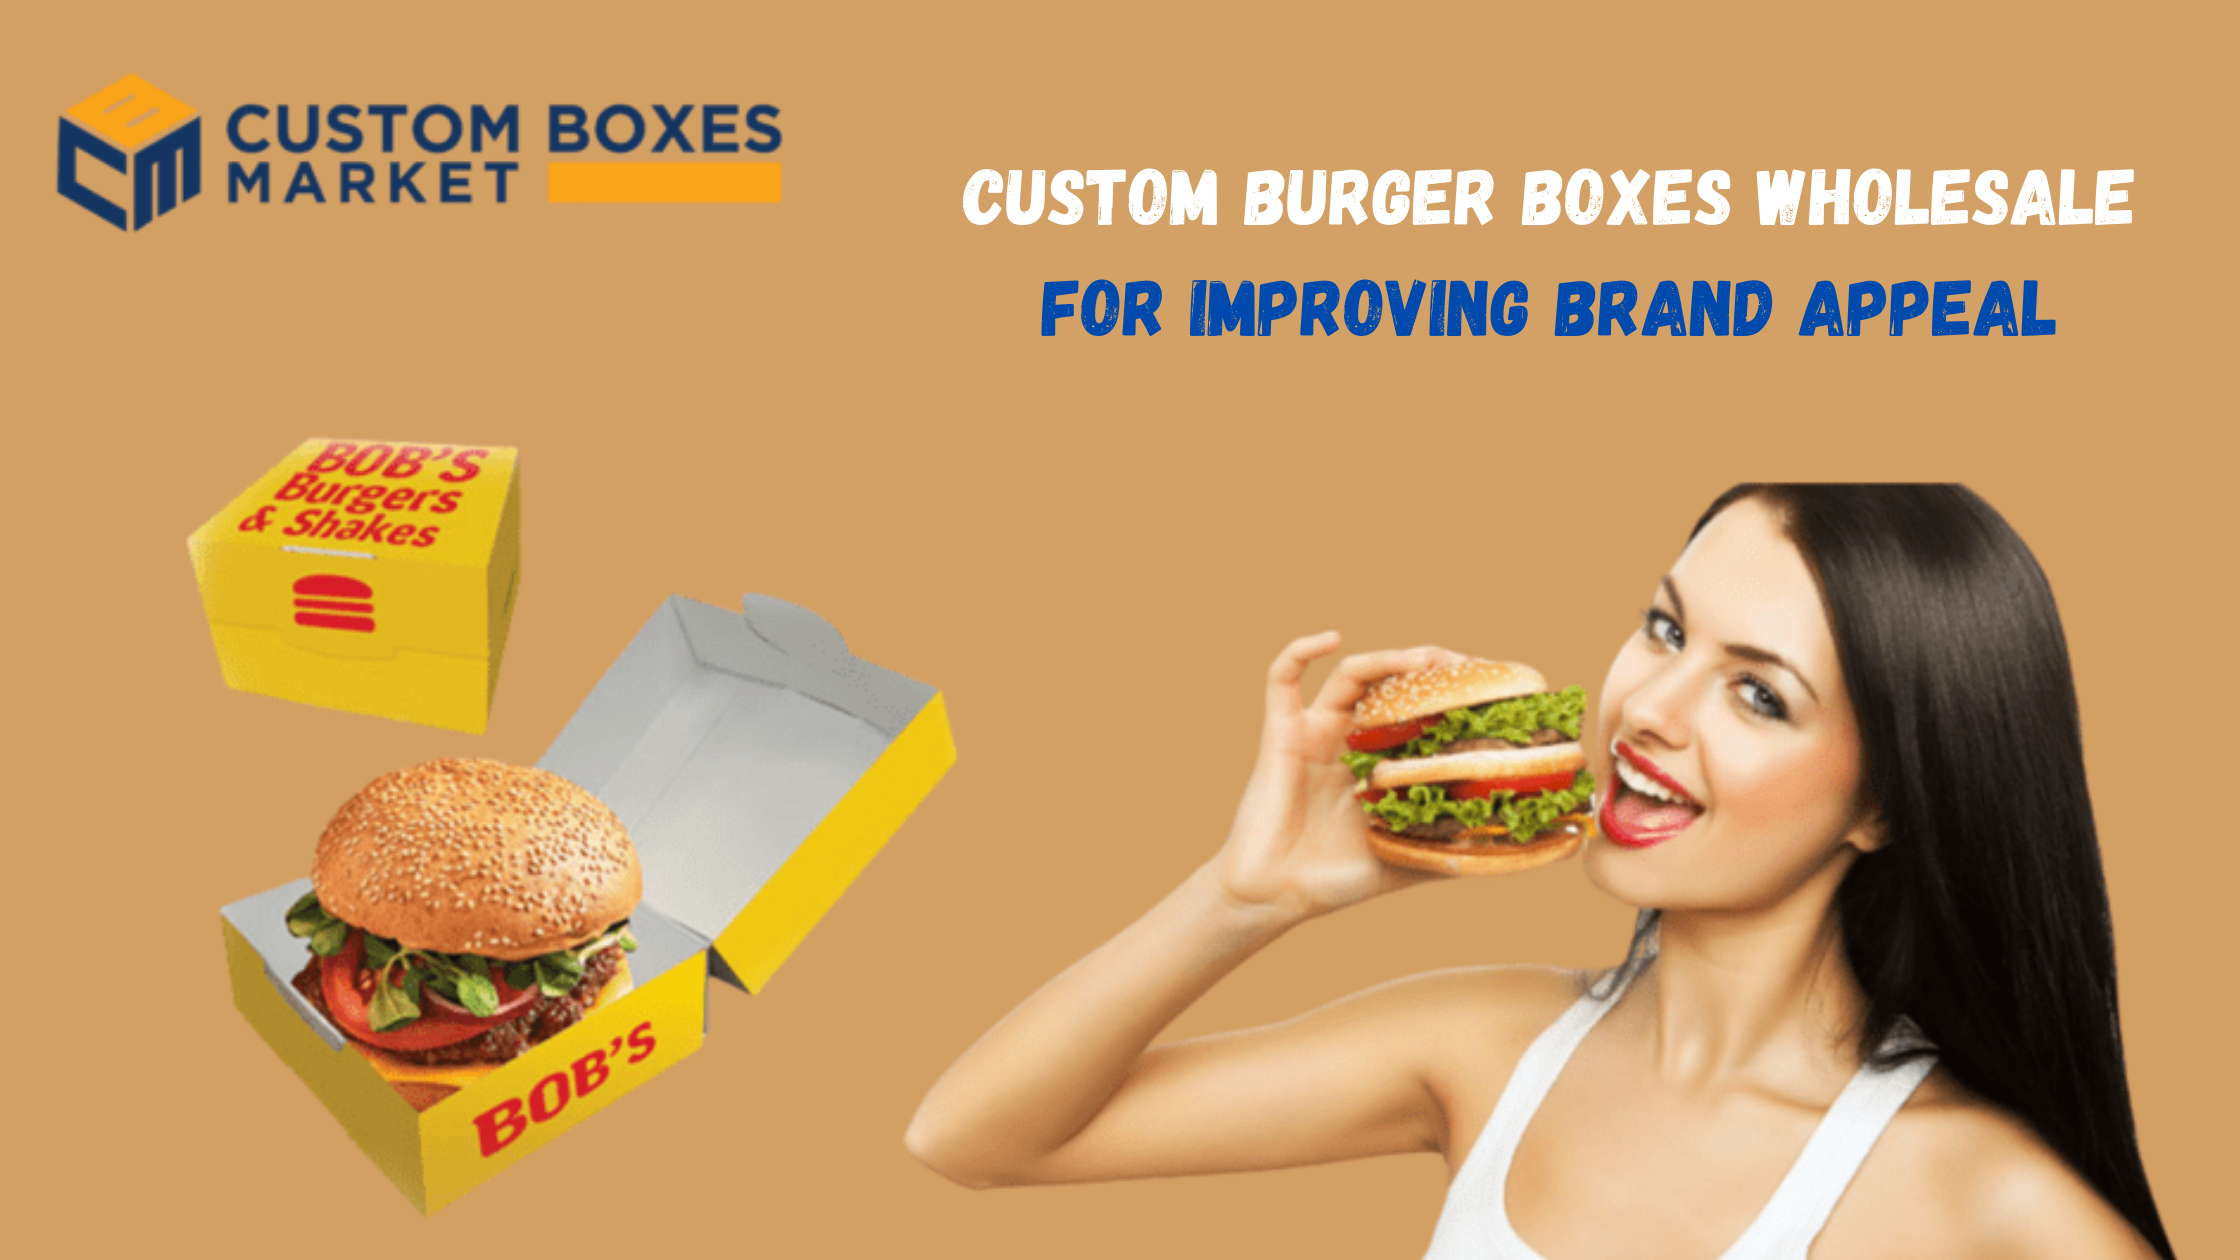 Custom burger boxes wholesale for improving brand appeal